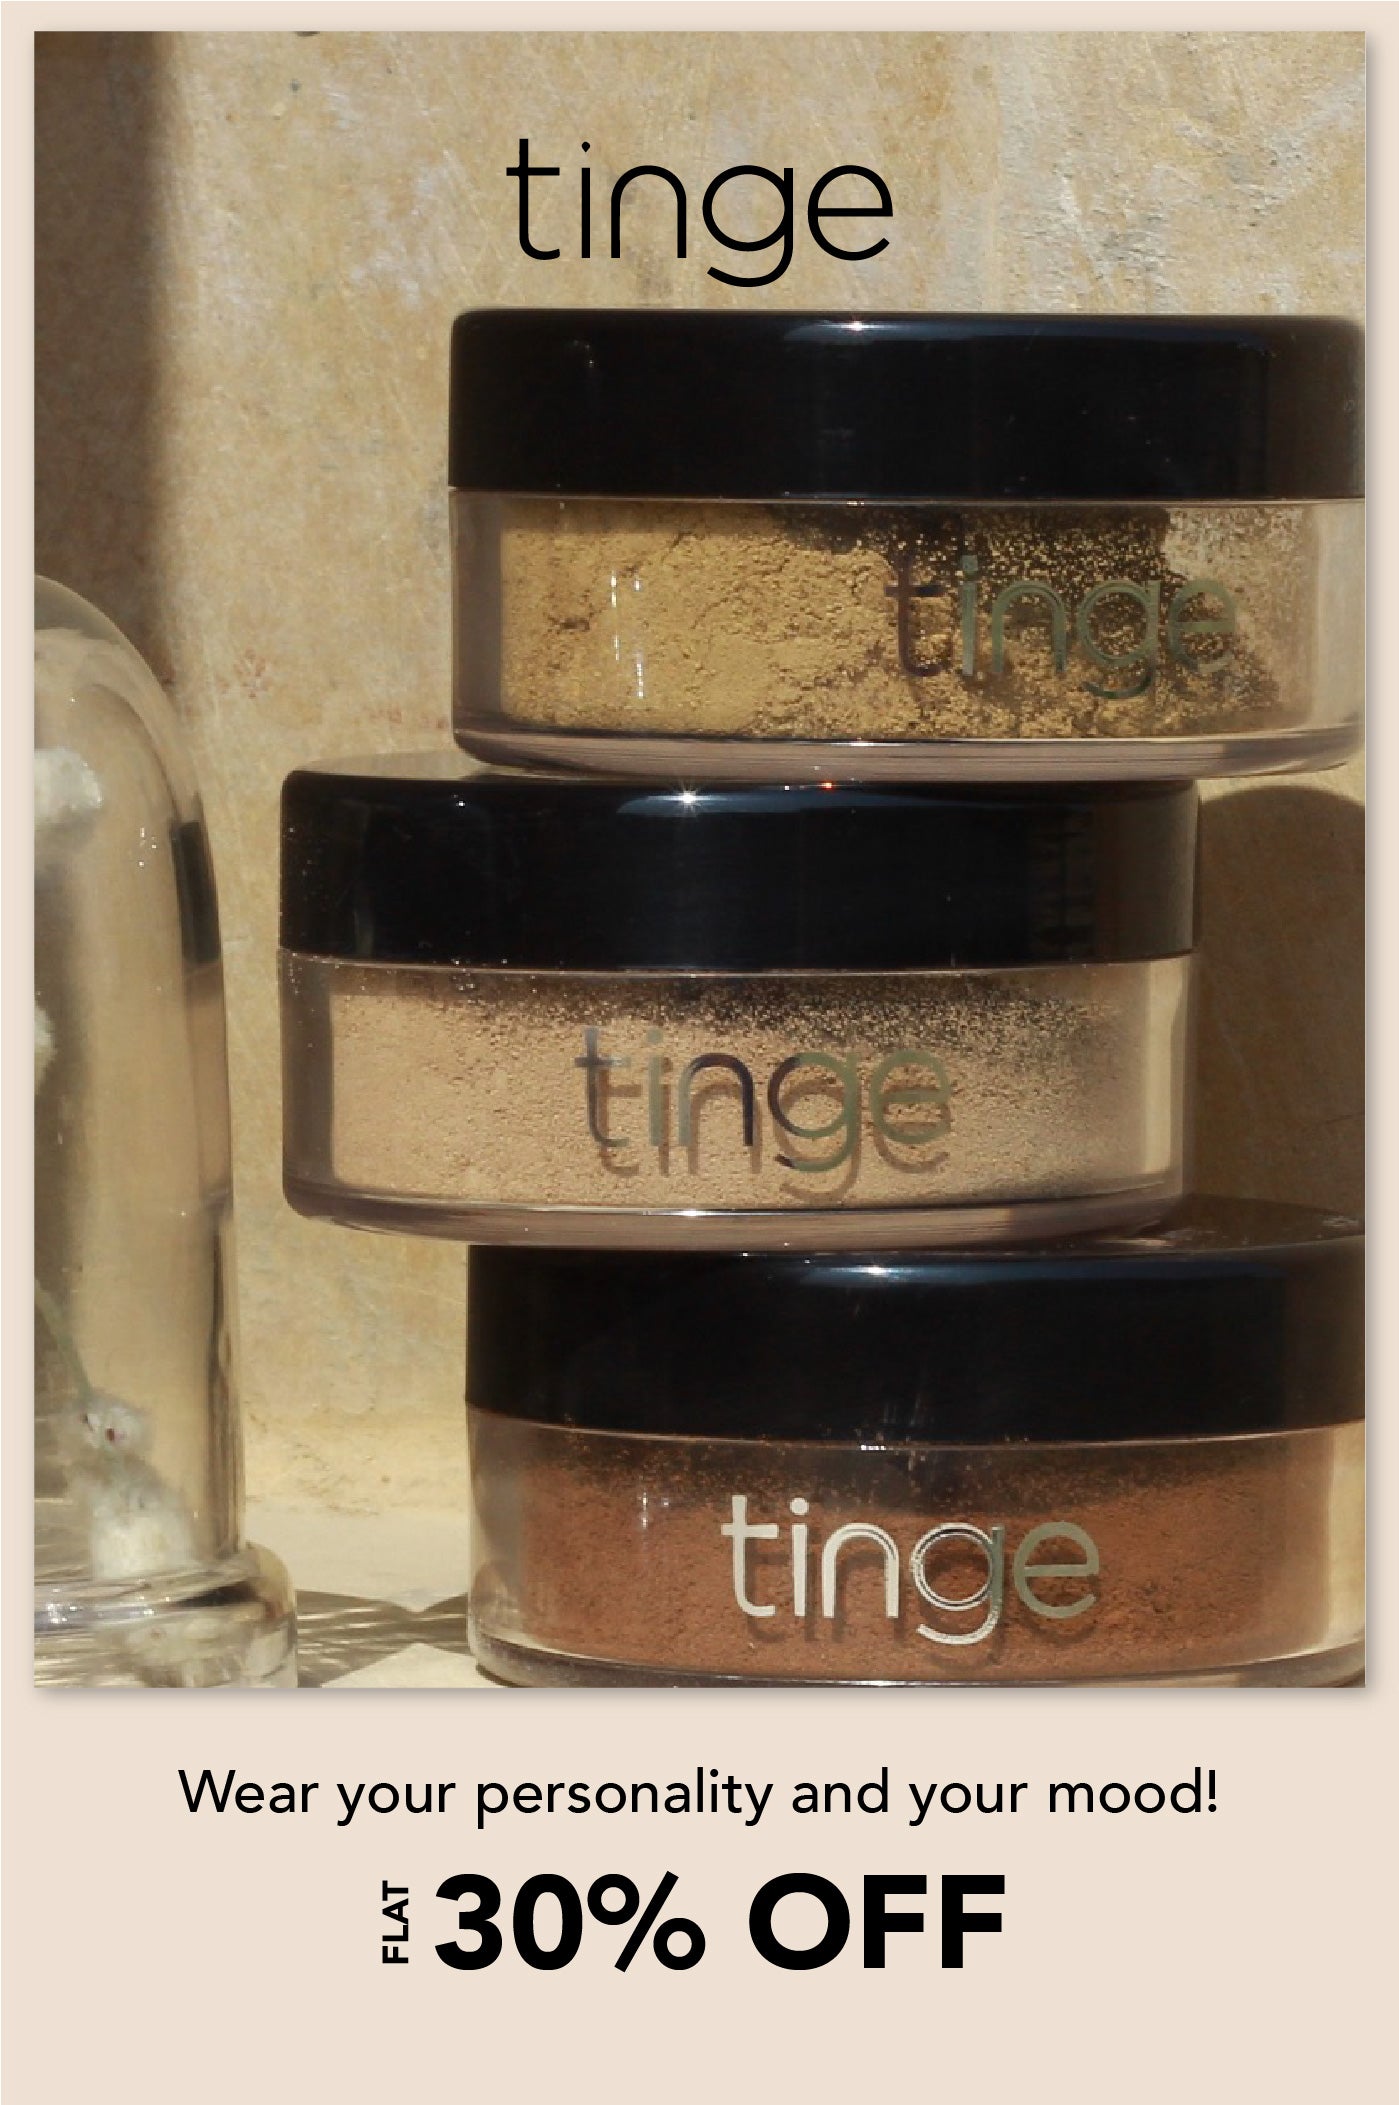 Shop for cruelty-free and toxin-free makeup online from Tinge on SublimeLife.in.